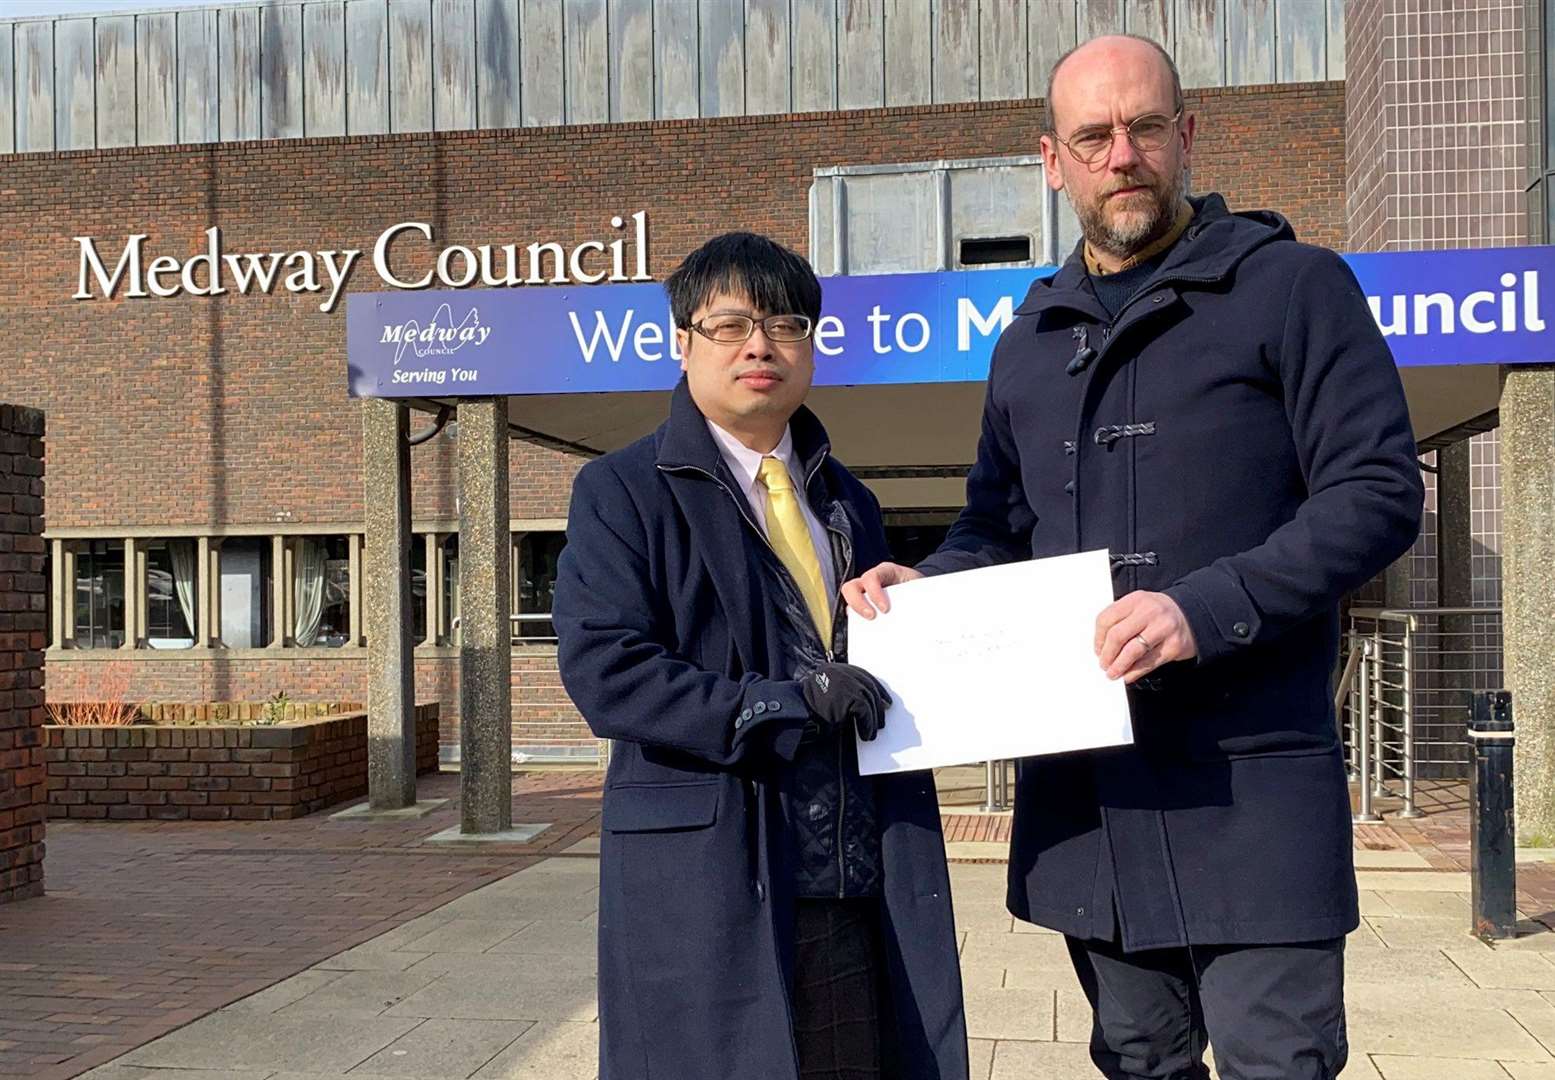 Lib Dems’ Chatham and Aylesford parliamentary candidate Nicholas Chan and Gillingham and Rainham candidate Stuart Bourne submitted the free swimming petition in March but were unsuccessful in reversing the council’s decision.